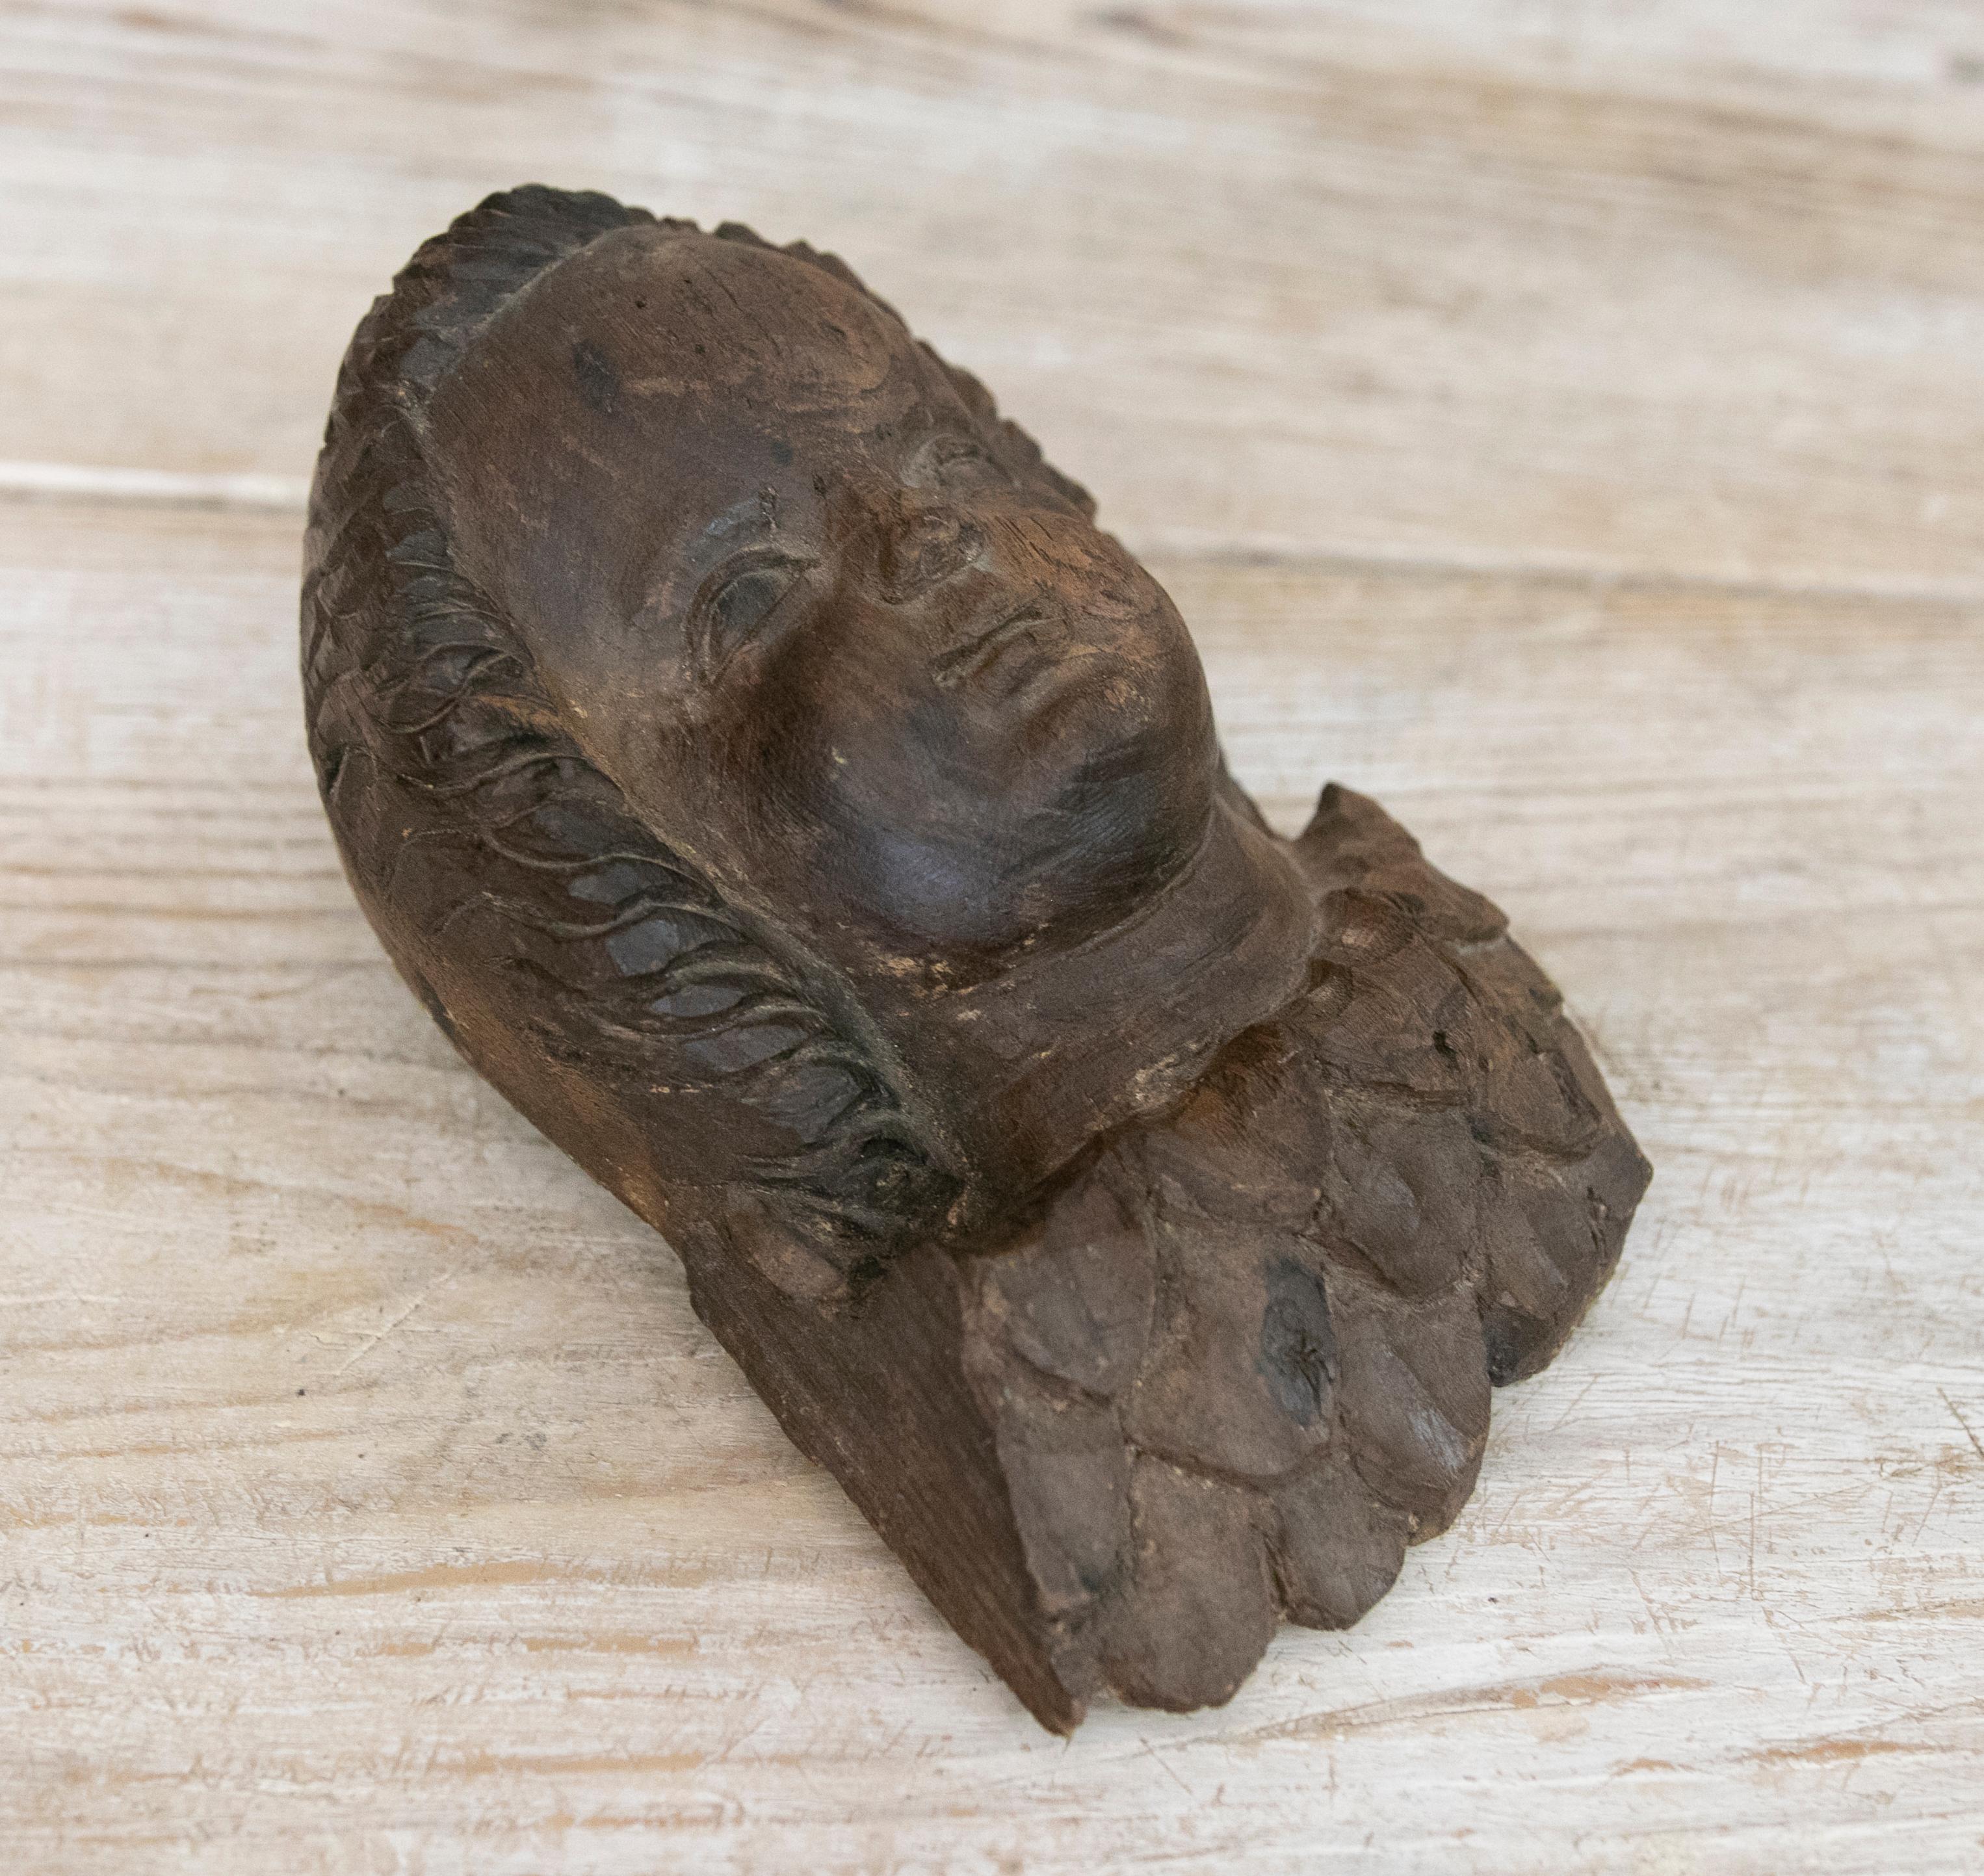 18th century Angel's head sculpture handcarved in wood.